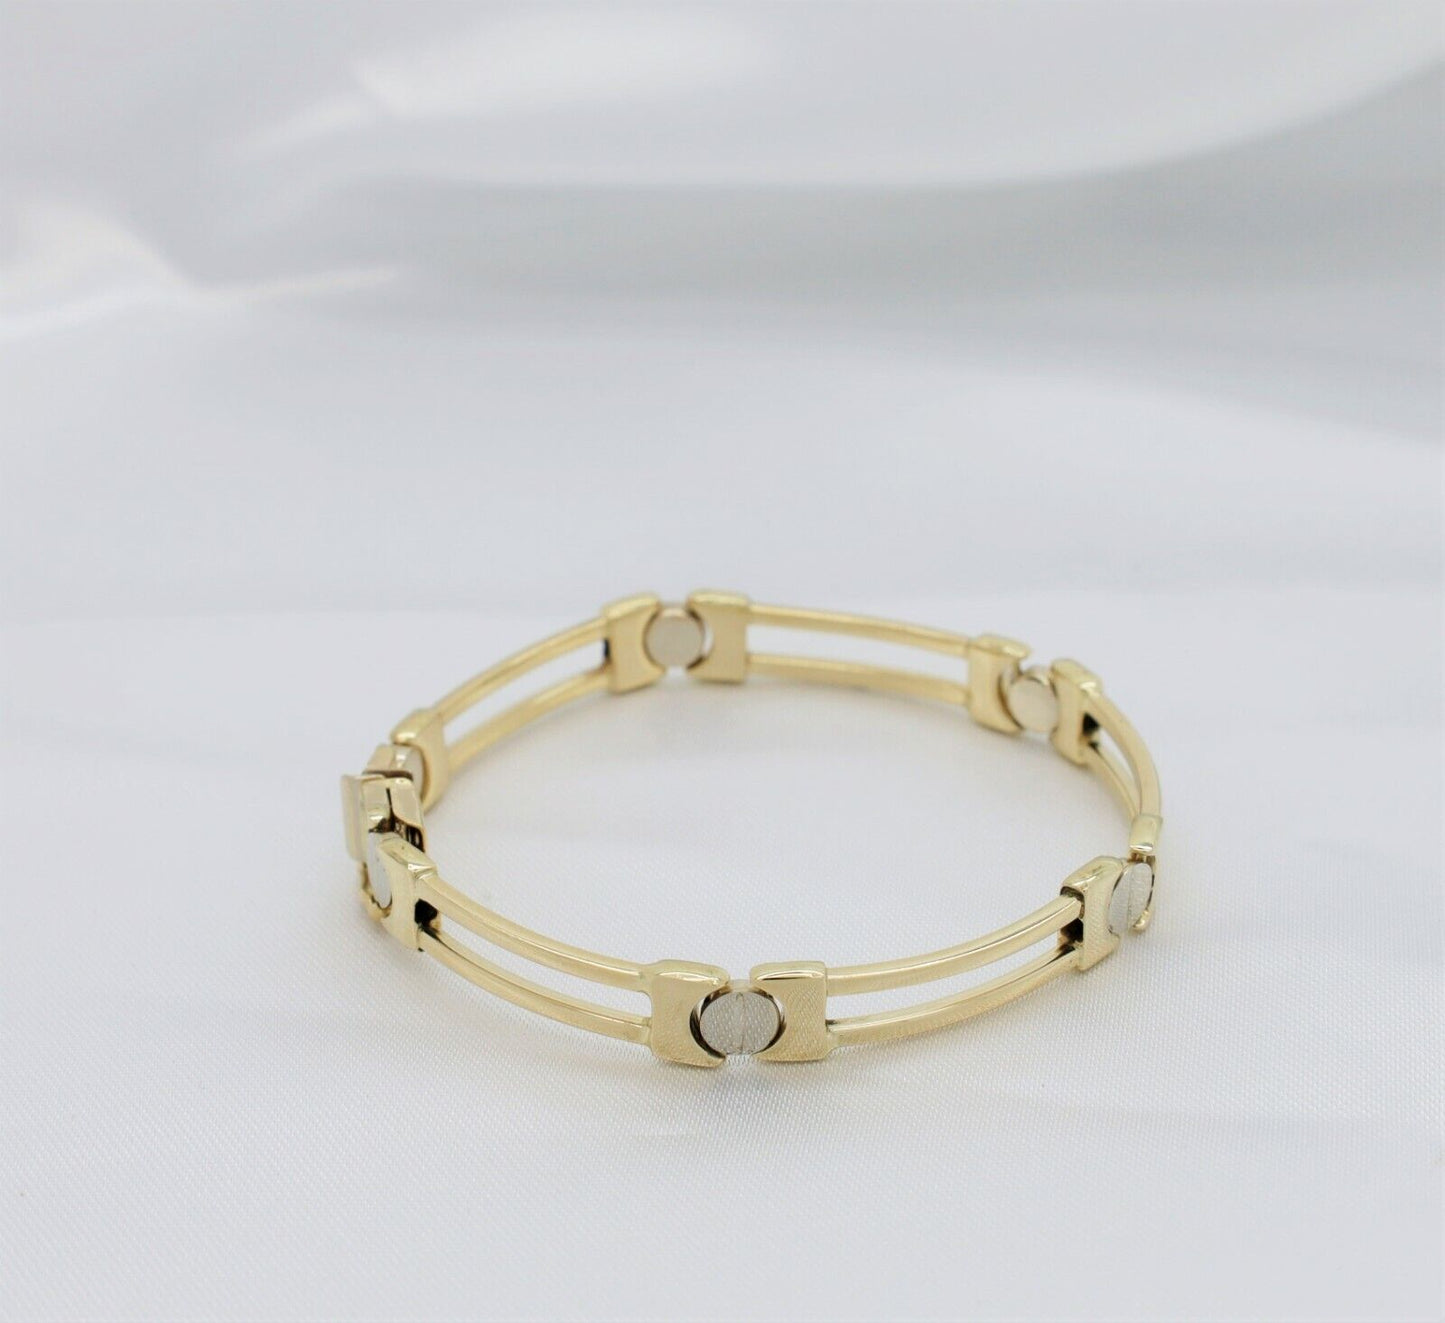 14k Yellow & White Gold Contemporary Bracelet, 7 inches - 13.2g